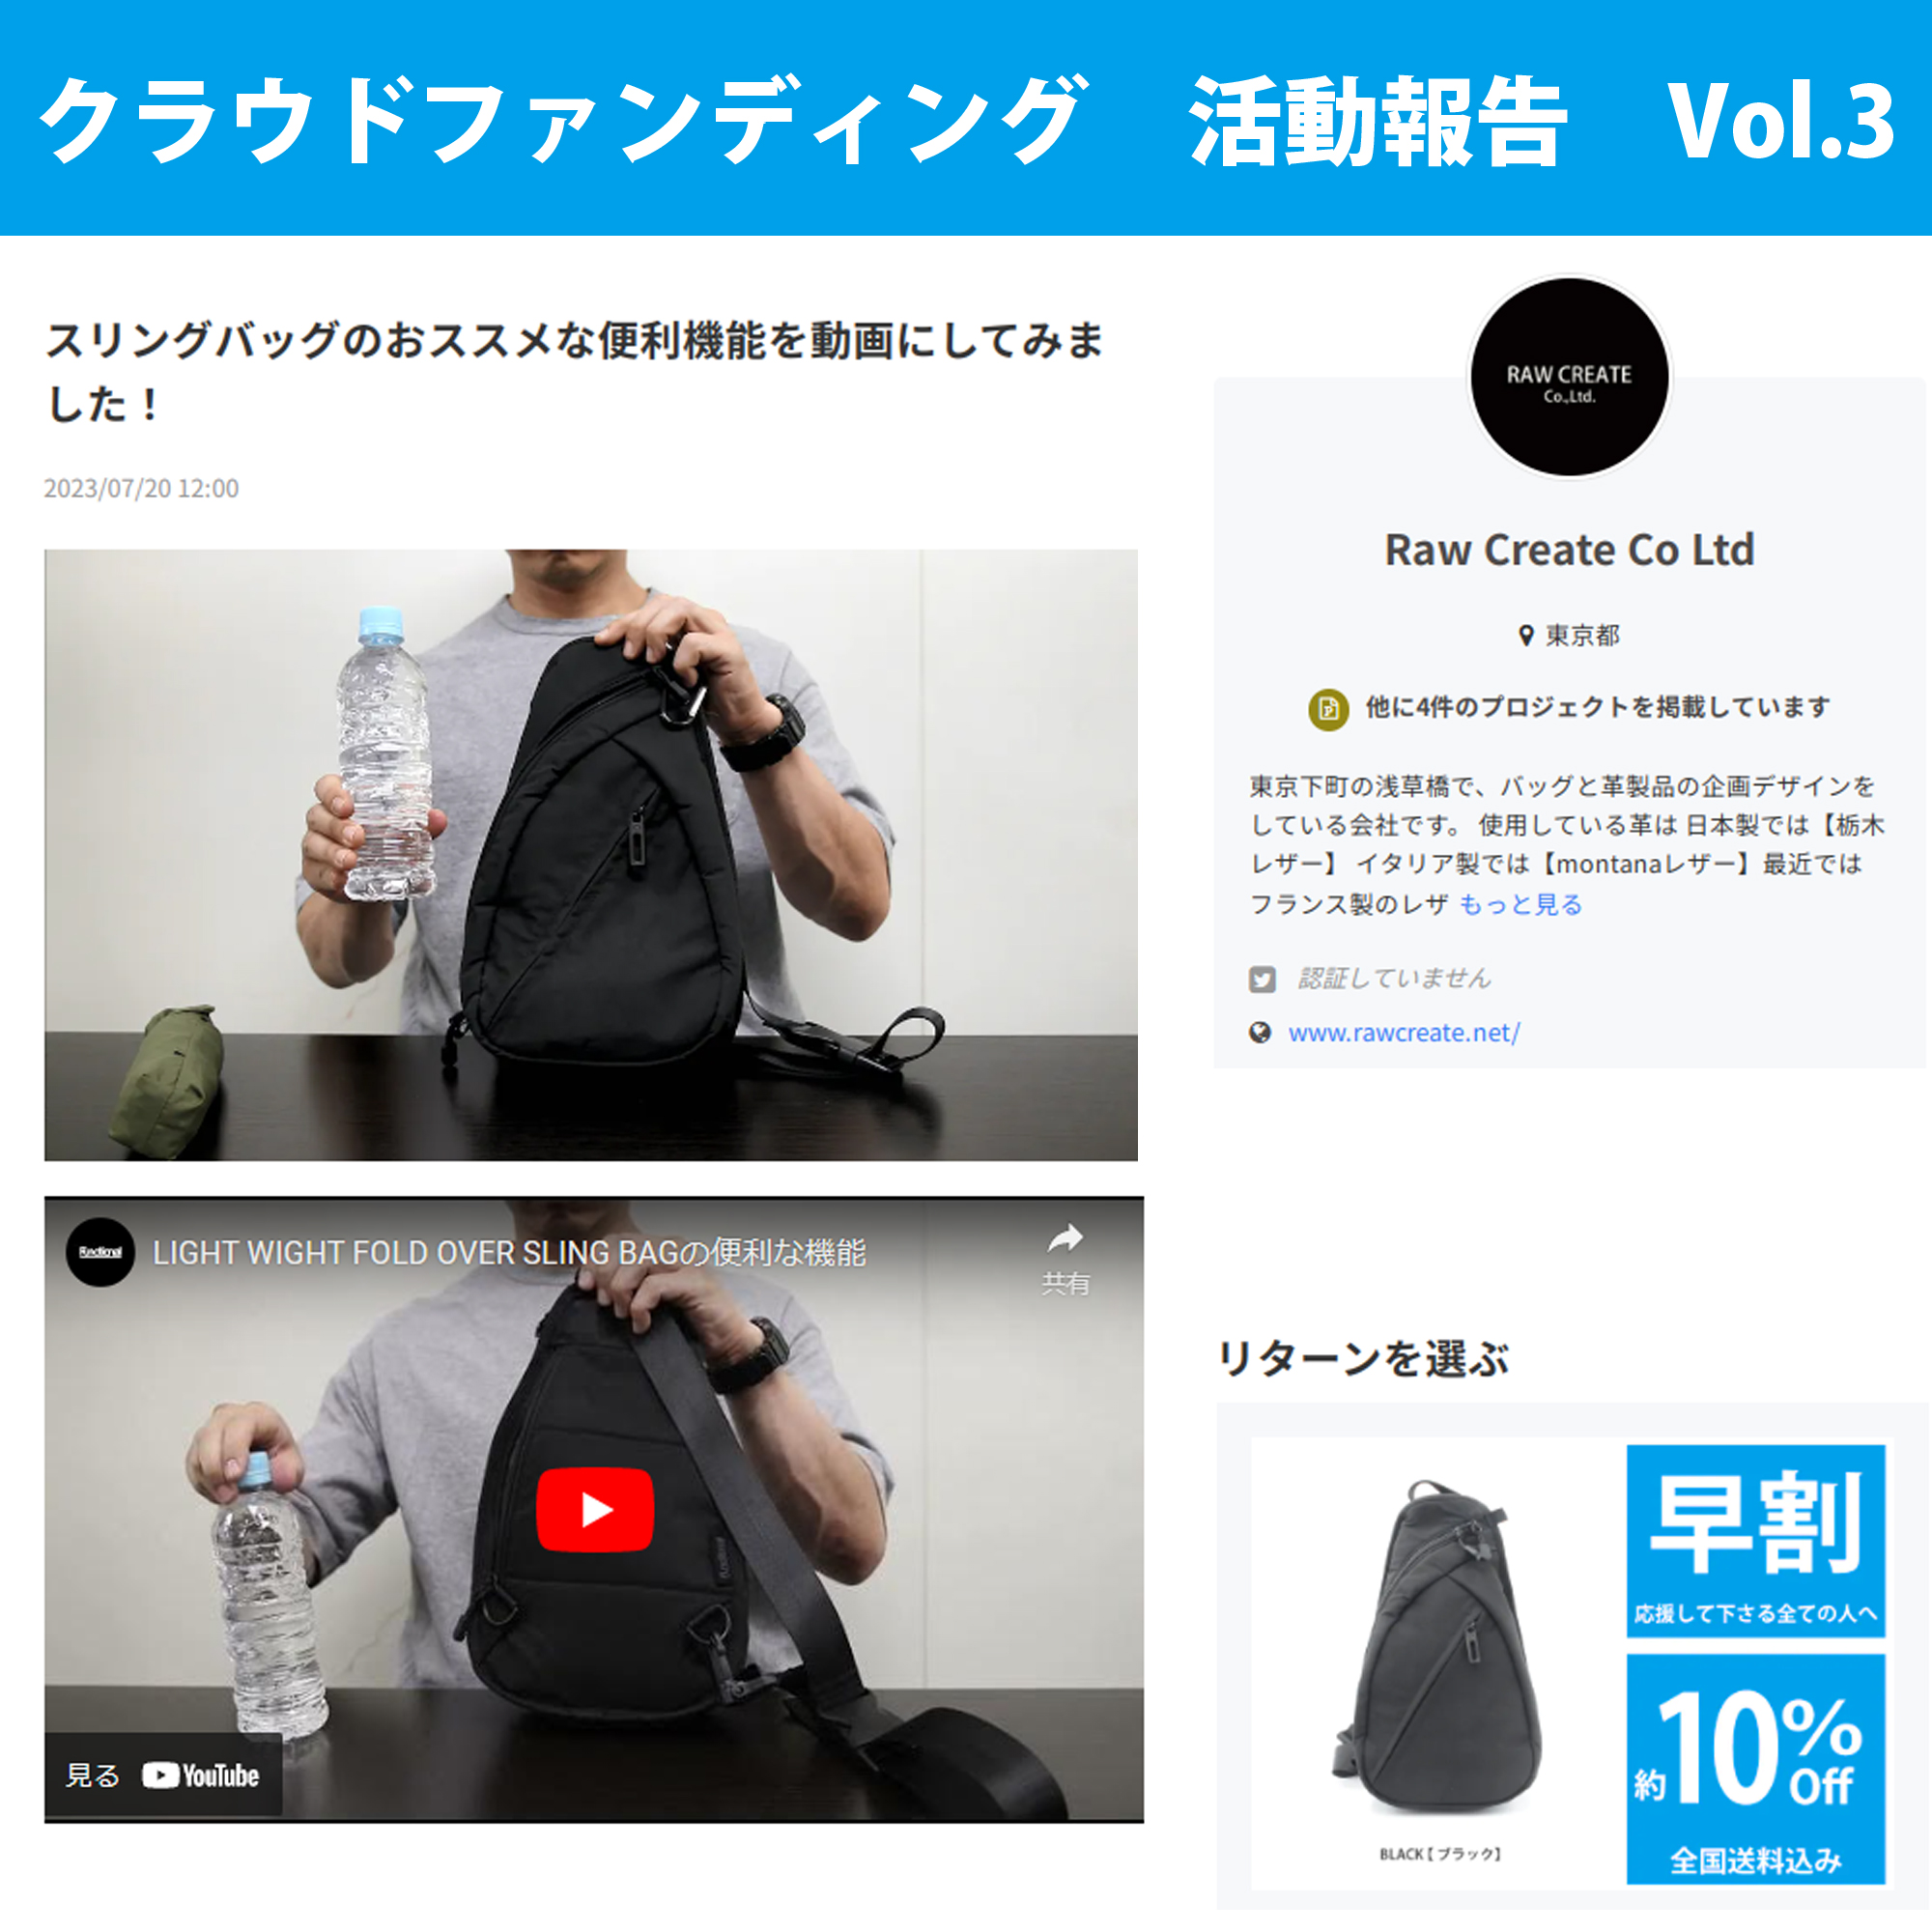 CAMPFIRE "FUNCTIONAL" 活動報告 Vol.3がアップされました！